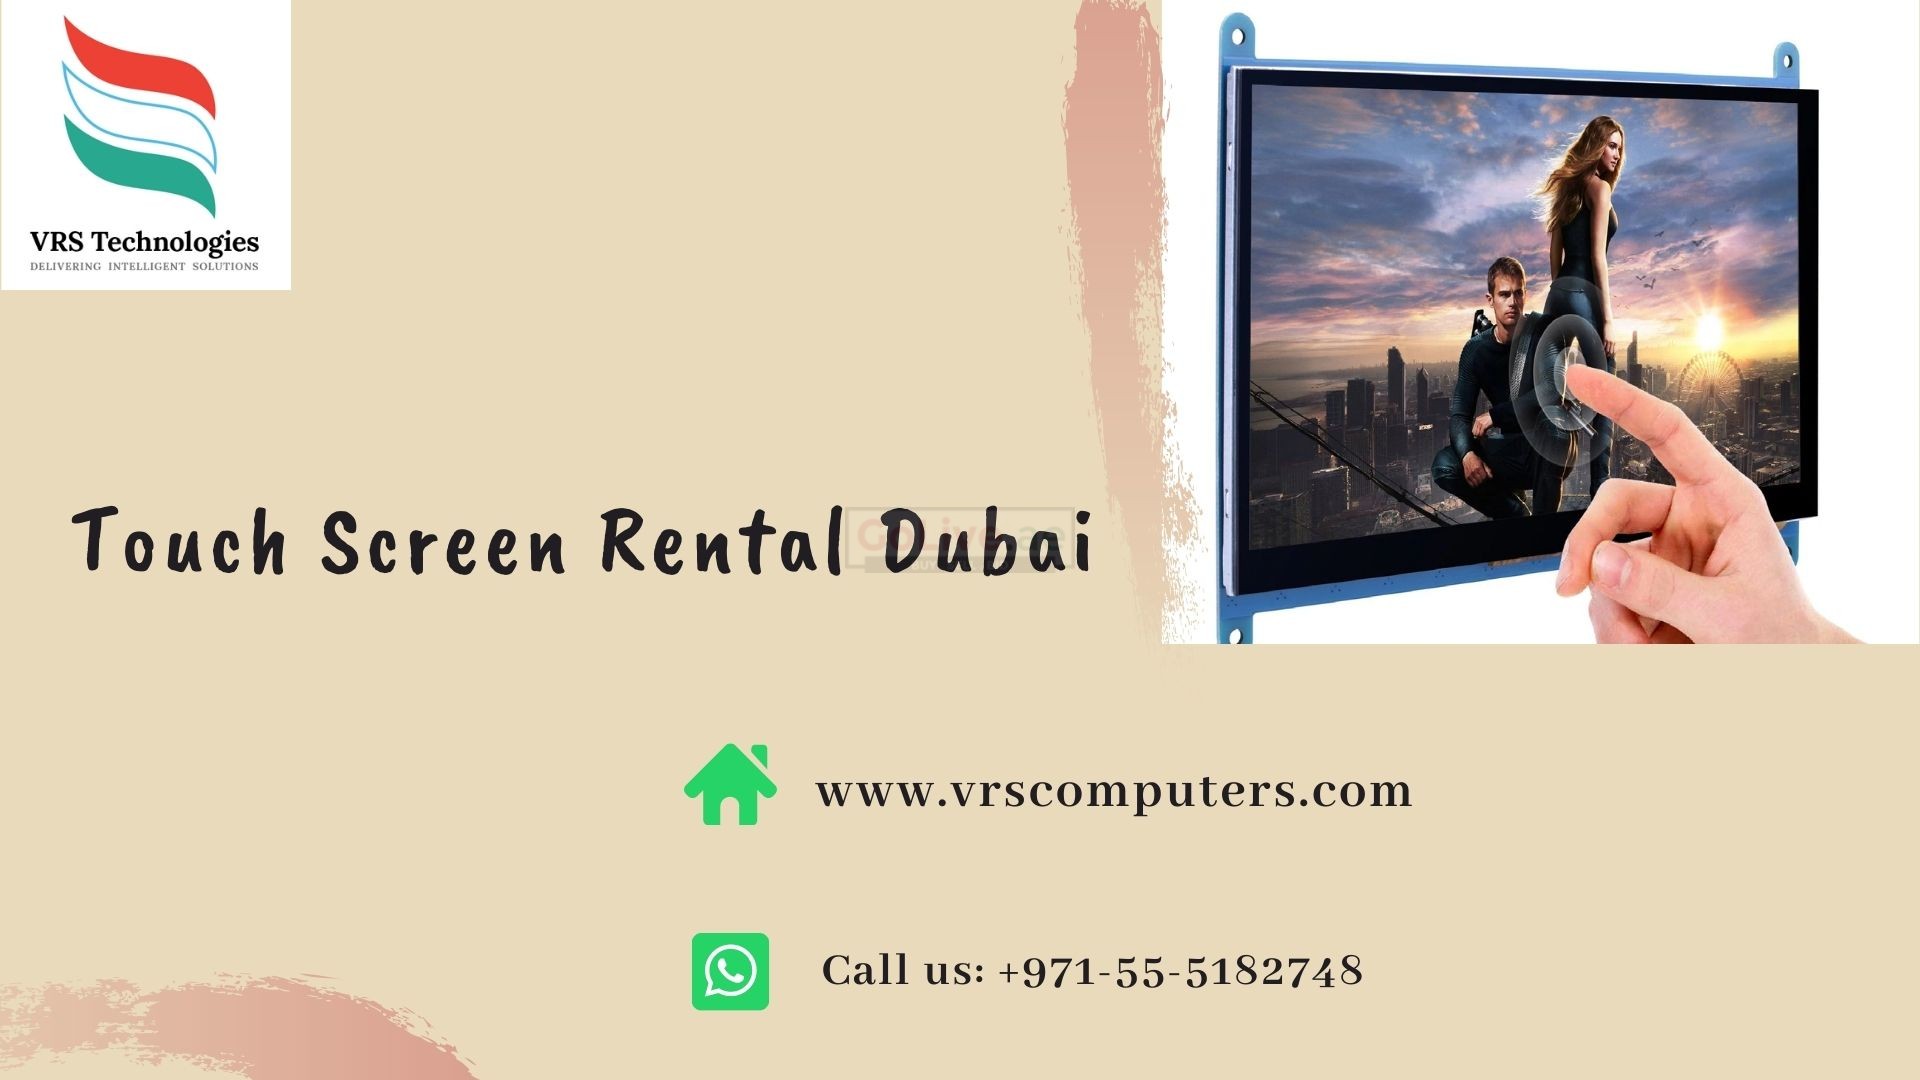 Trusted One Stop Center for Touch Screen Rentals Dubai